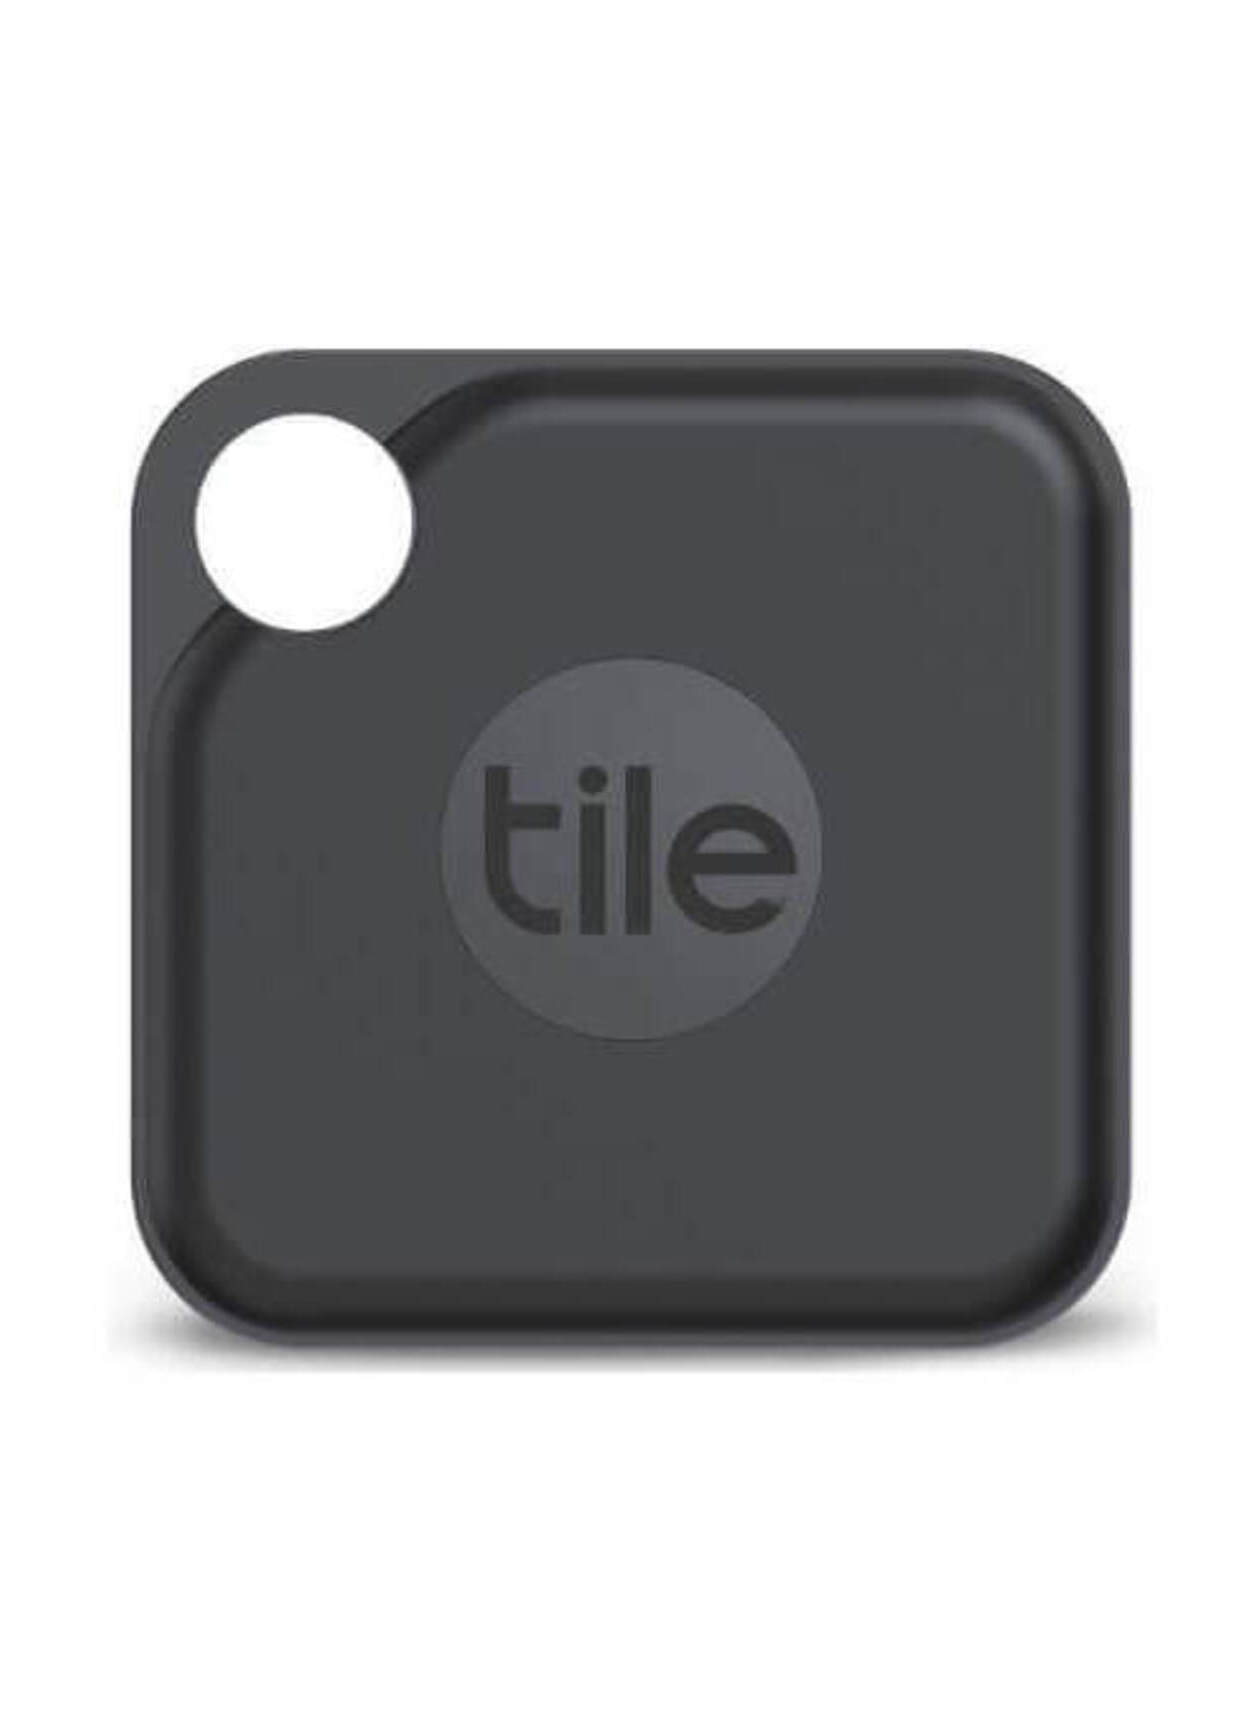 Tile Pro 2020 4-pack High Performance Bluetooth Tracker Key BLACK - Shop  Open Box Deals, Affordable Best Buy Products